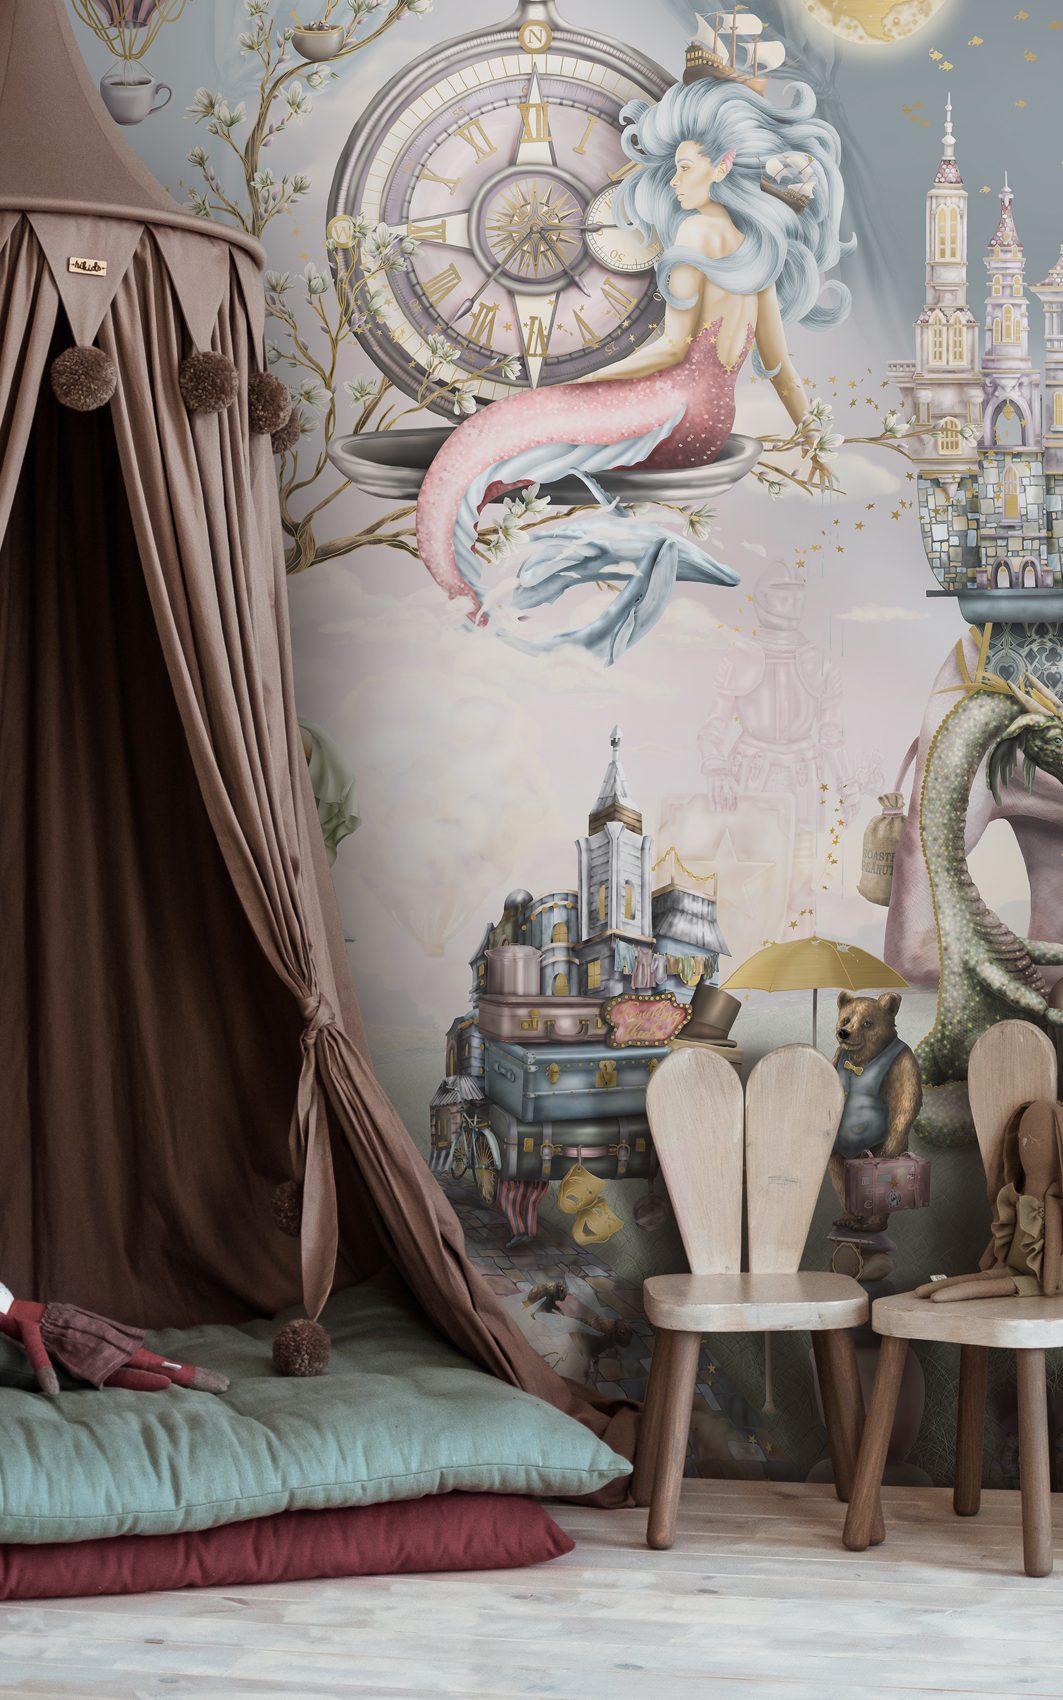 Beautiful girls bedroom design with magical fairy tale wallpaper featuring story book illustrations. Bedroom design has a stage play set up with tent canopy. In colours of pink purple gold sage green wood etc.